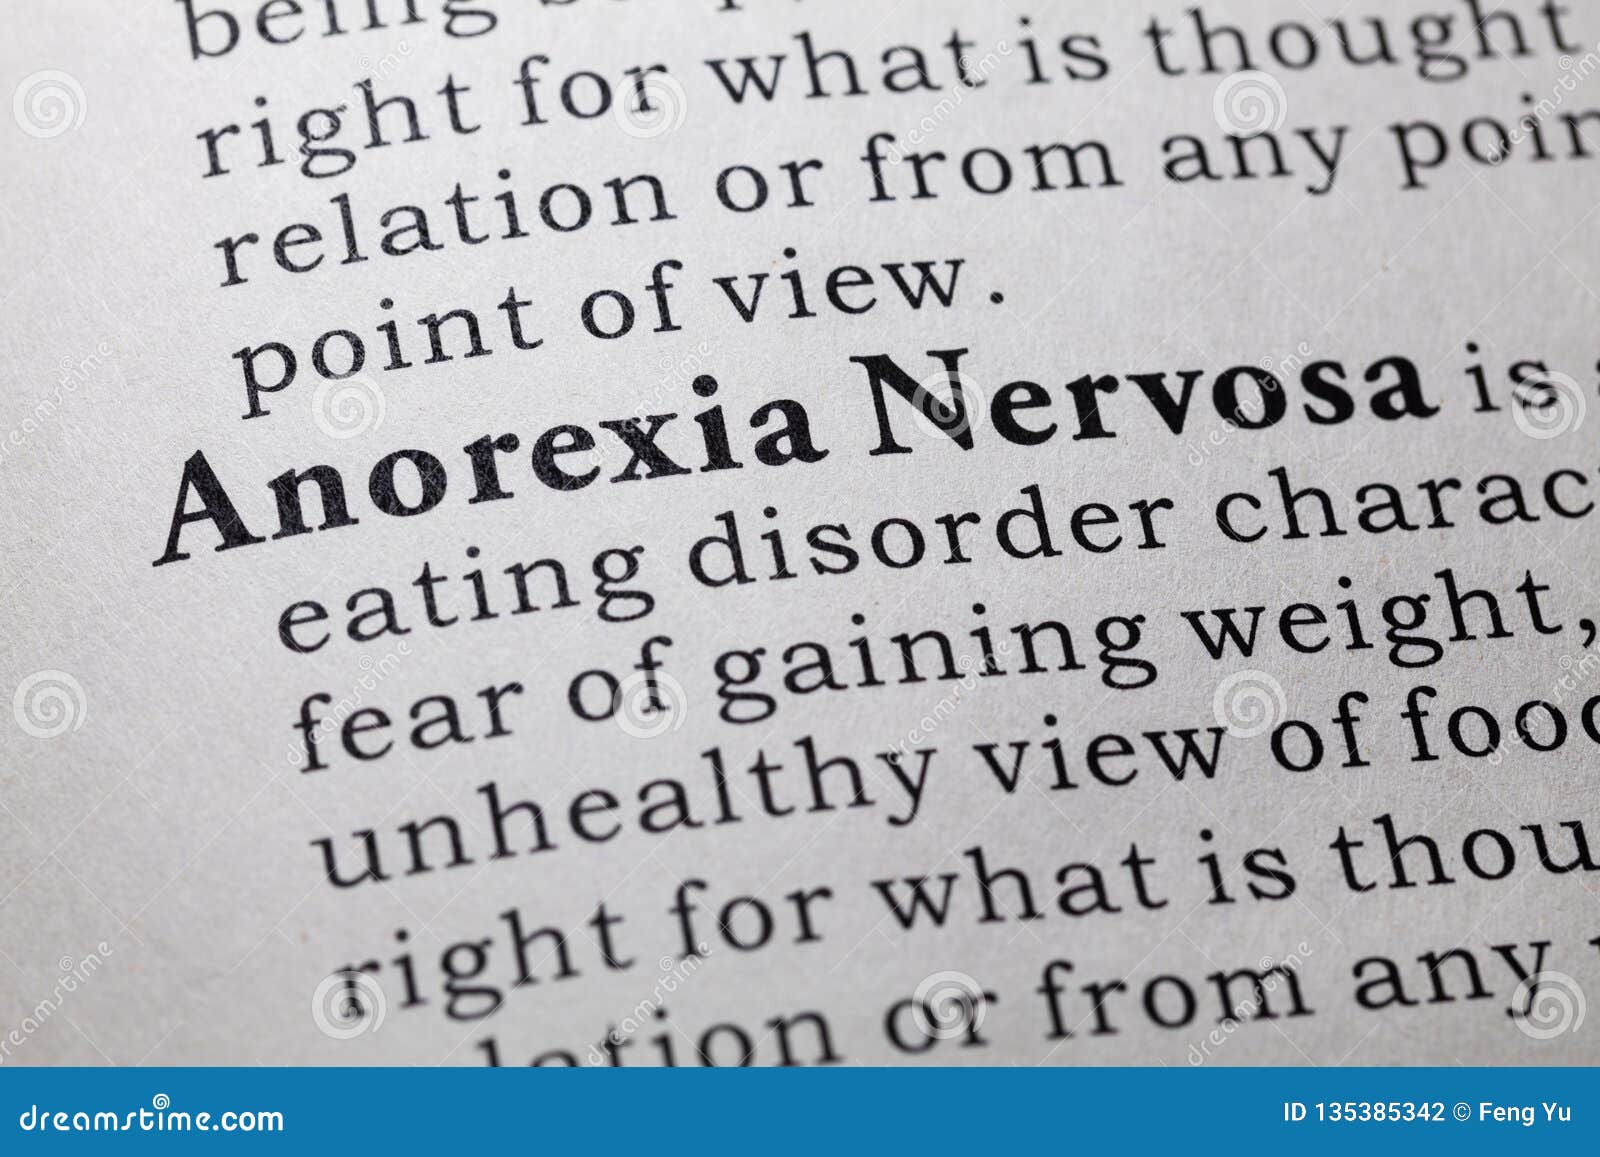 definition of anorexia nervosa